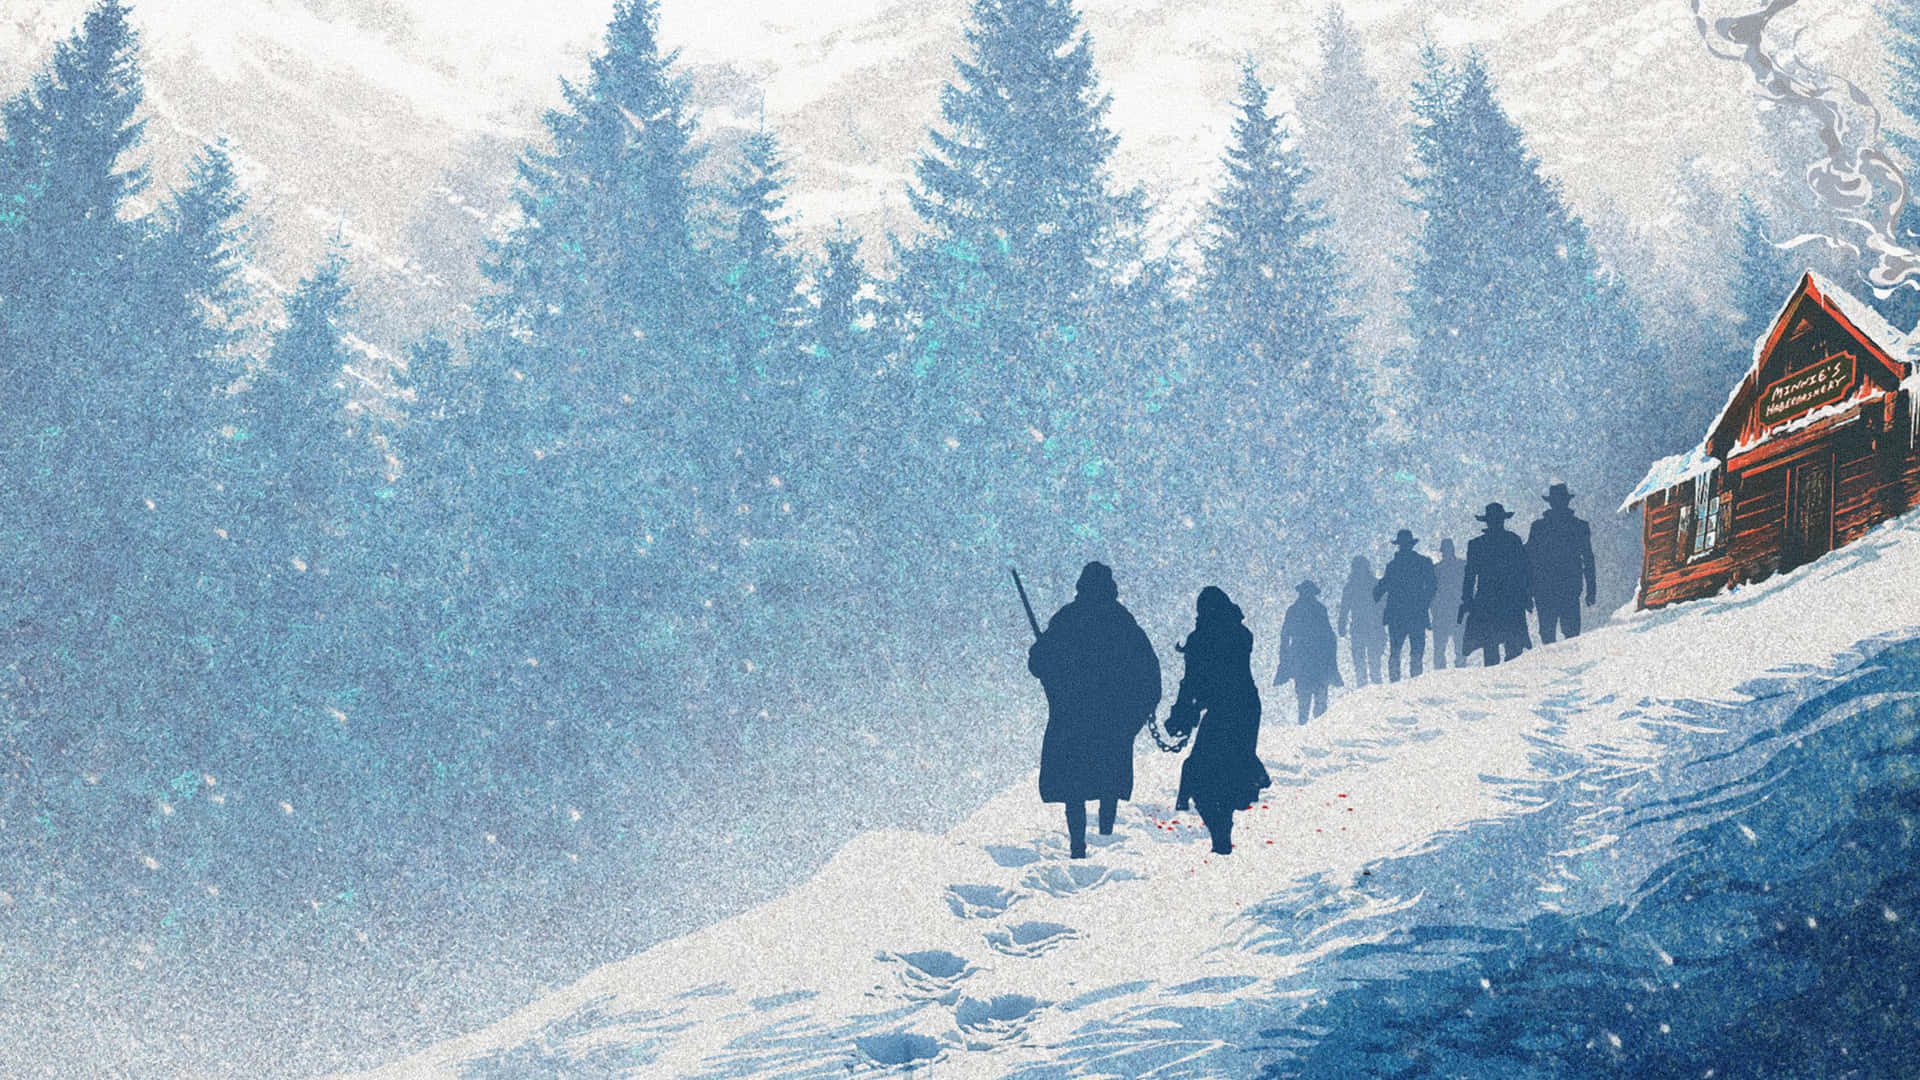 Members Of 'the Hateful Eight' In A Snowy Landscape Wallpaper